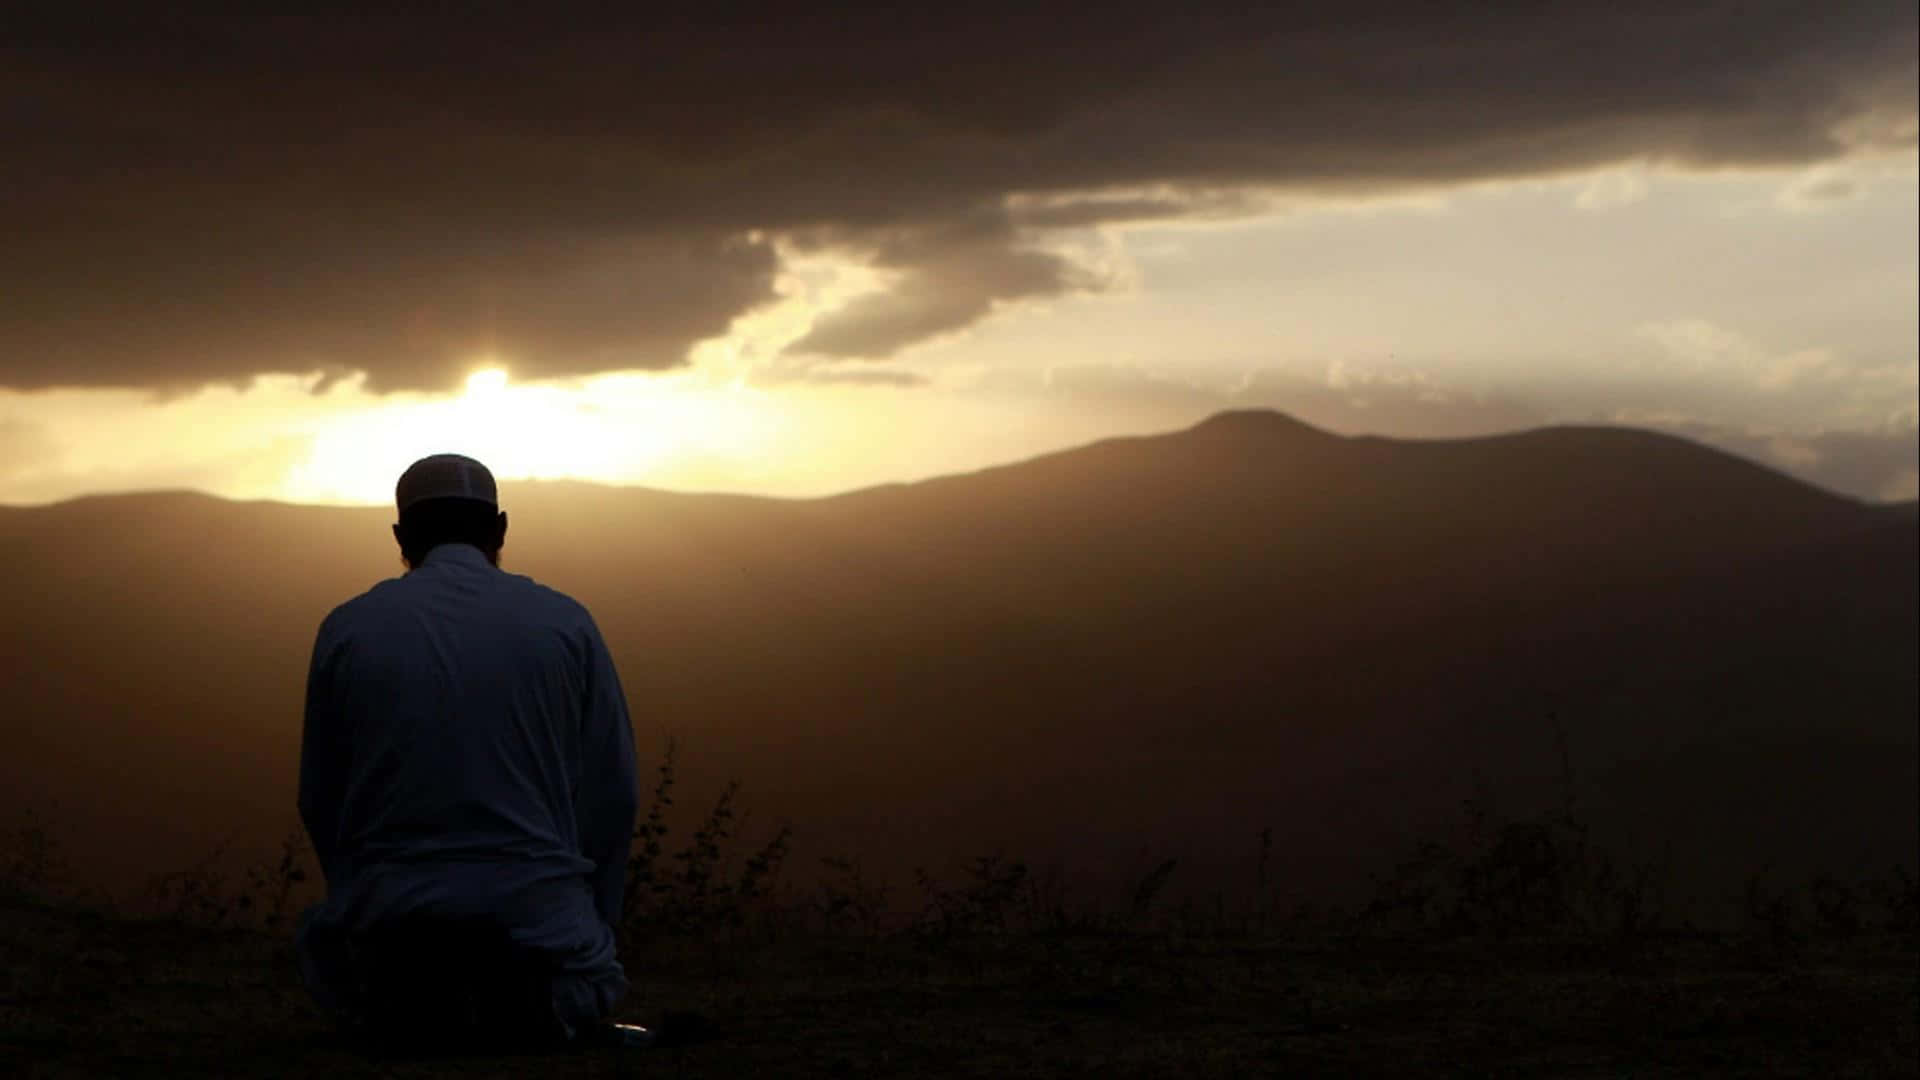 A Man Sitting On A Hill Watching The Sunset